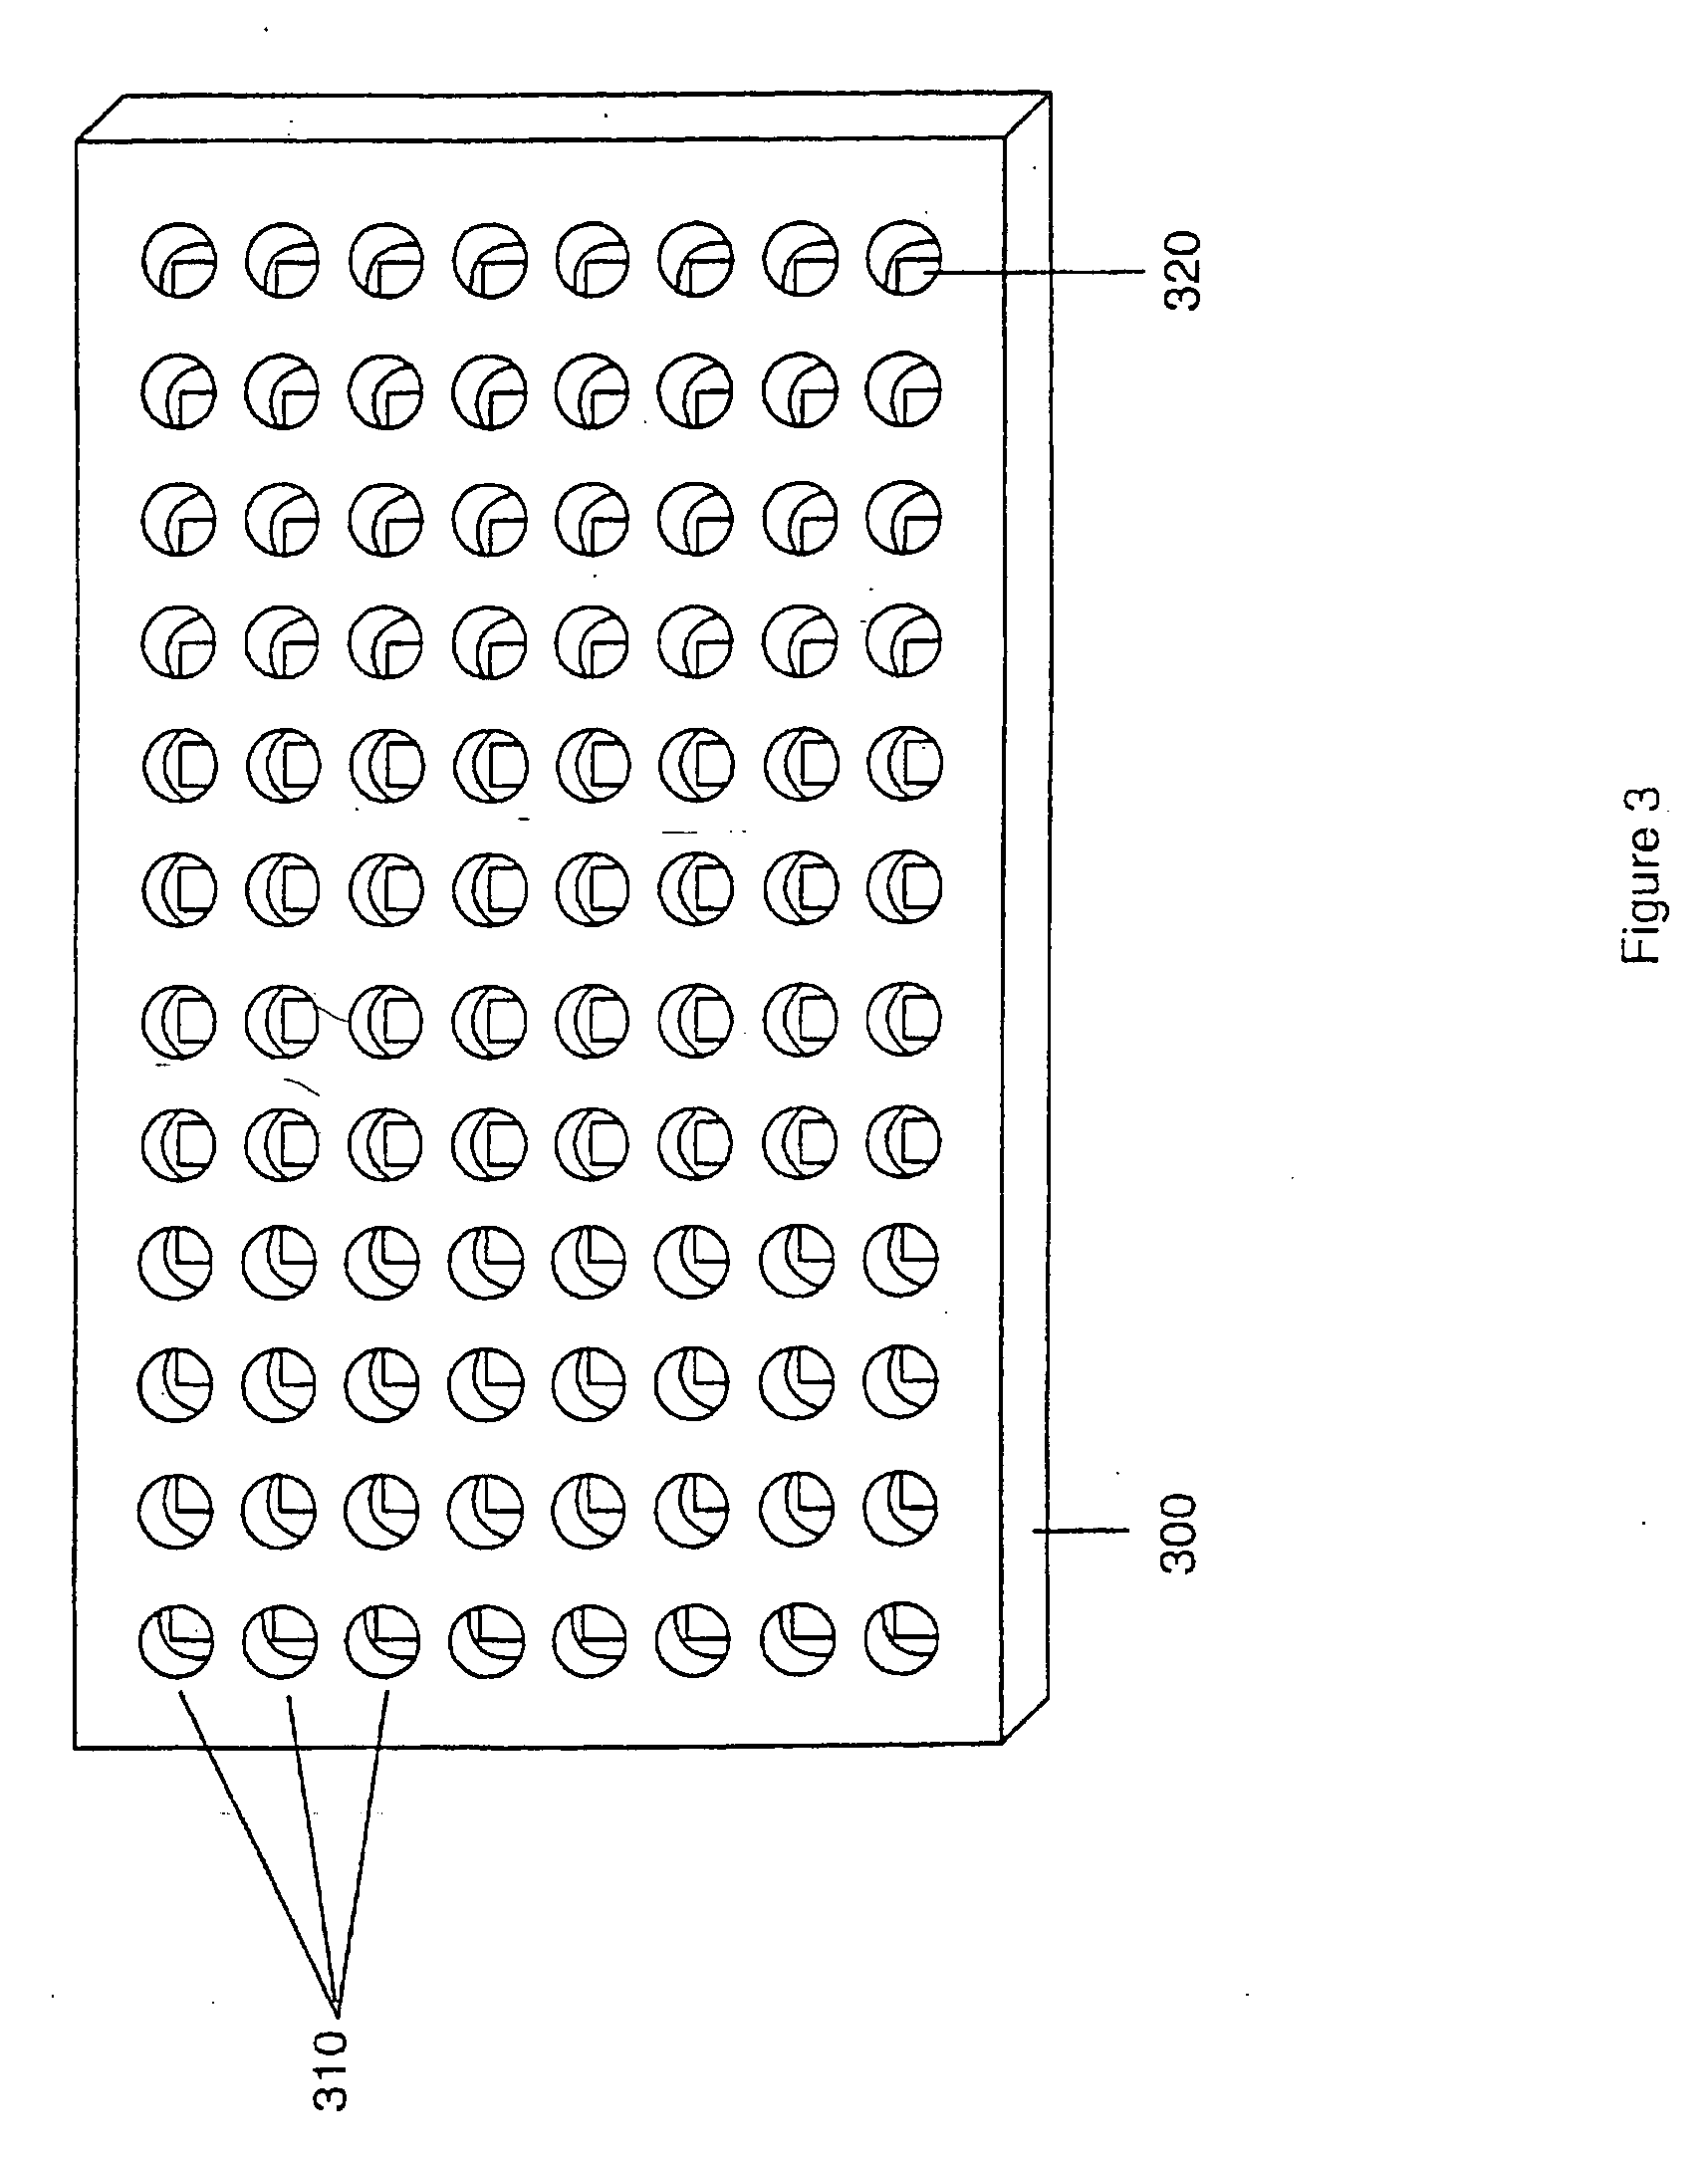 Methods for concurrently processing multiple biological chip assays